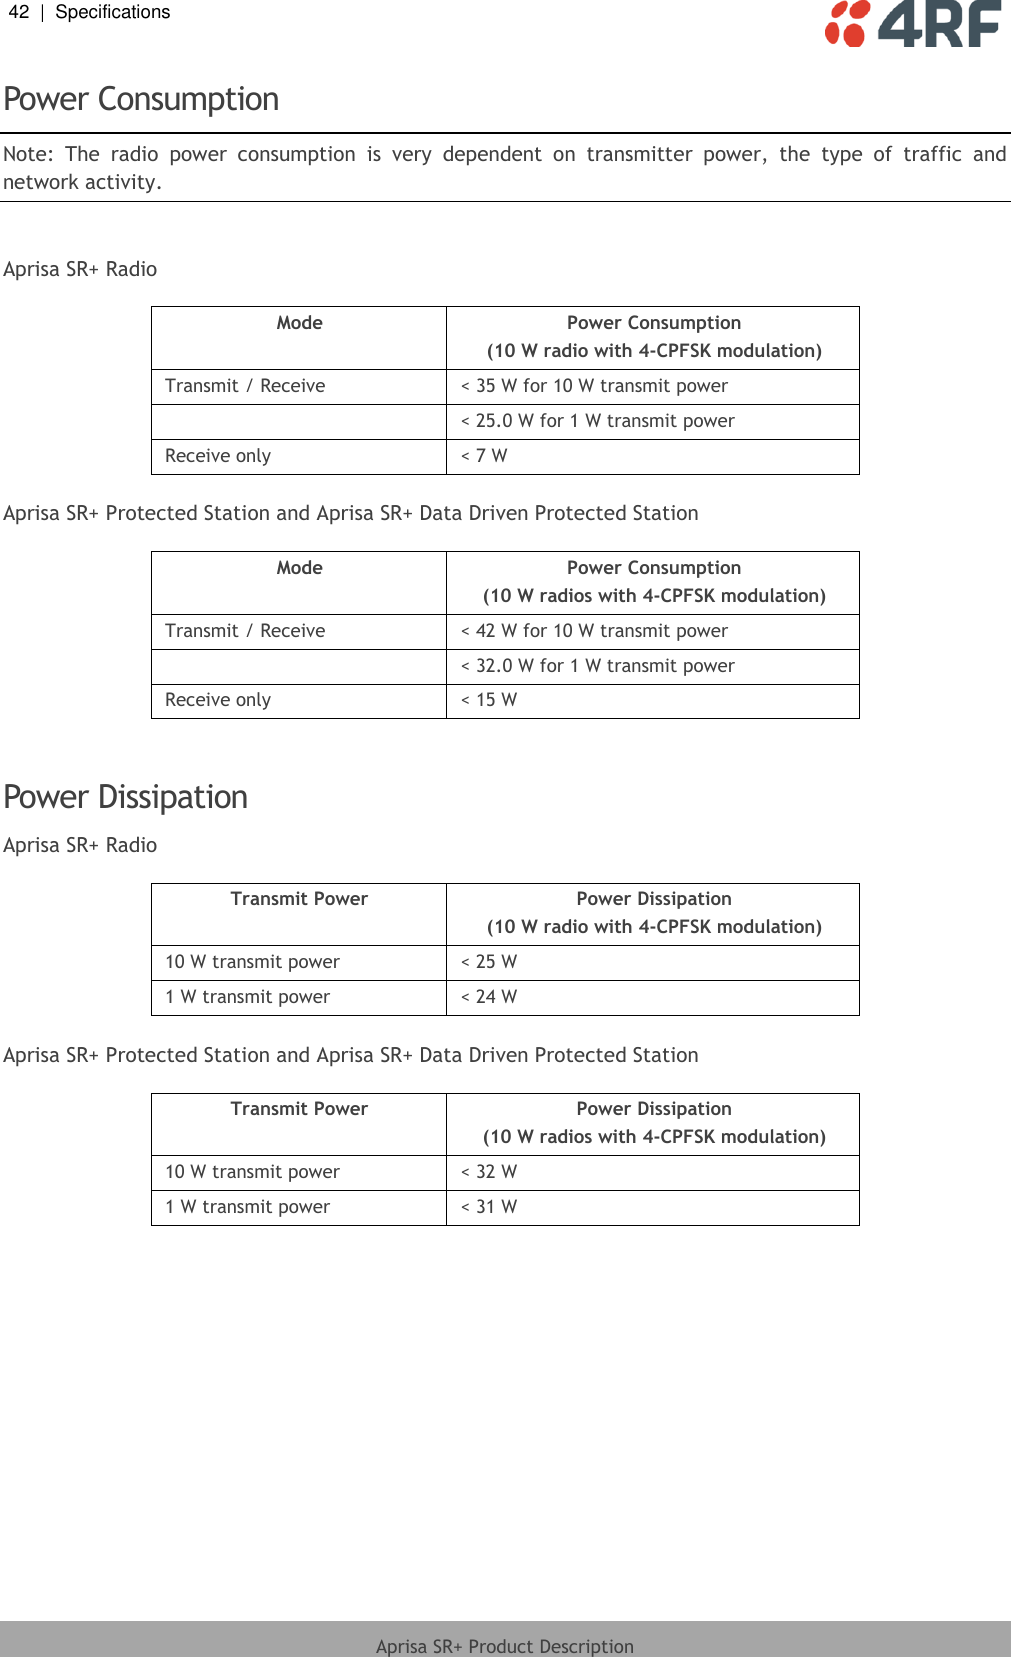 42  |  Specifications   Aprisa SR+ Product Description  Power Consumption Note:  The  radio  power  consumption  is  very  dependent  on  transmitter  power,  the  type  of  traffic  and network activity.  Aprisa SR+ Radio  Mode Power Consumption (10 W radio with 4-CPFSK modulation) Transmit / Receive &lt; 35 W for 10 W transmit power  &lt; 25.0 W for 1 W transmit power Receive only &lt; 7 W  Aprisa SR+ Protected Station and Aprisa SR+ Data Driven Protected Station  Mode Power Consumption (10 W radios with 4-CPFSK modulation) Transmit / Receive &lt; 42 W for 10 W transmit power  &lt; 32.0 W for 1 W transmit power Receive only &lt; 15 W   Power Dissipation Aprisa SR+ Radio  Transmit Power Power Dissipation (10 W radio with 4-CPFSK modulation) 10 W transmit power &lt; 25 W 1 W transmit power &lt; 24 W  Aprisa SR+ Protected Station and Aprisa SR+ Data Driven Protected Station  Transmit Power Power Dissipation (10 W radios with 4-CPFSK modulation) 10 W transmit power &lt; 32 W 1 W transmit power &lt; 31 W  